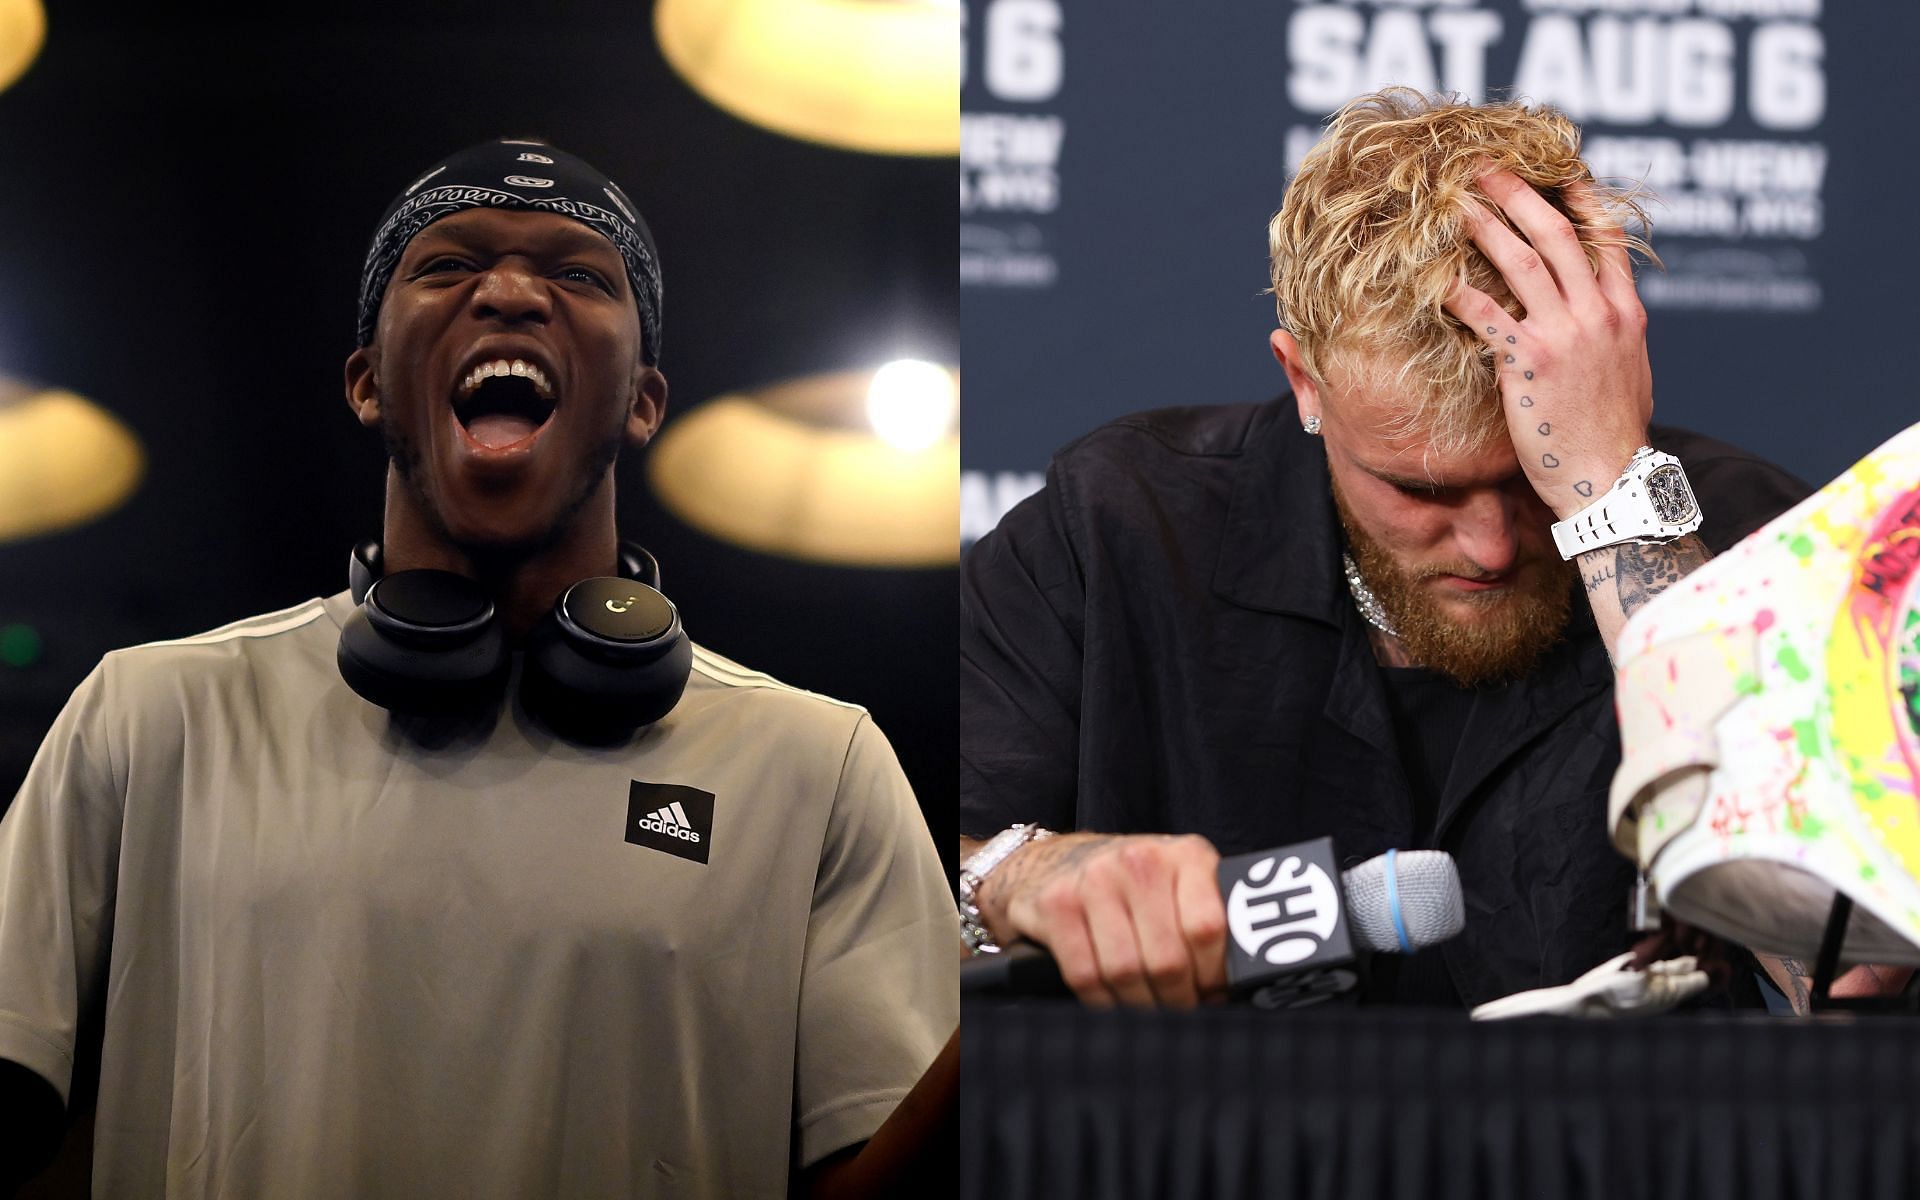 KSI (left) and Jake Paul (right) (Image credits Getty Images)